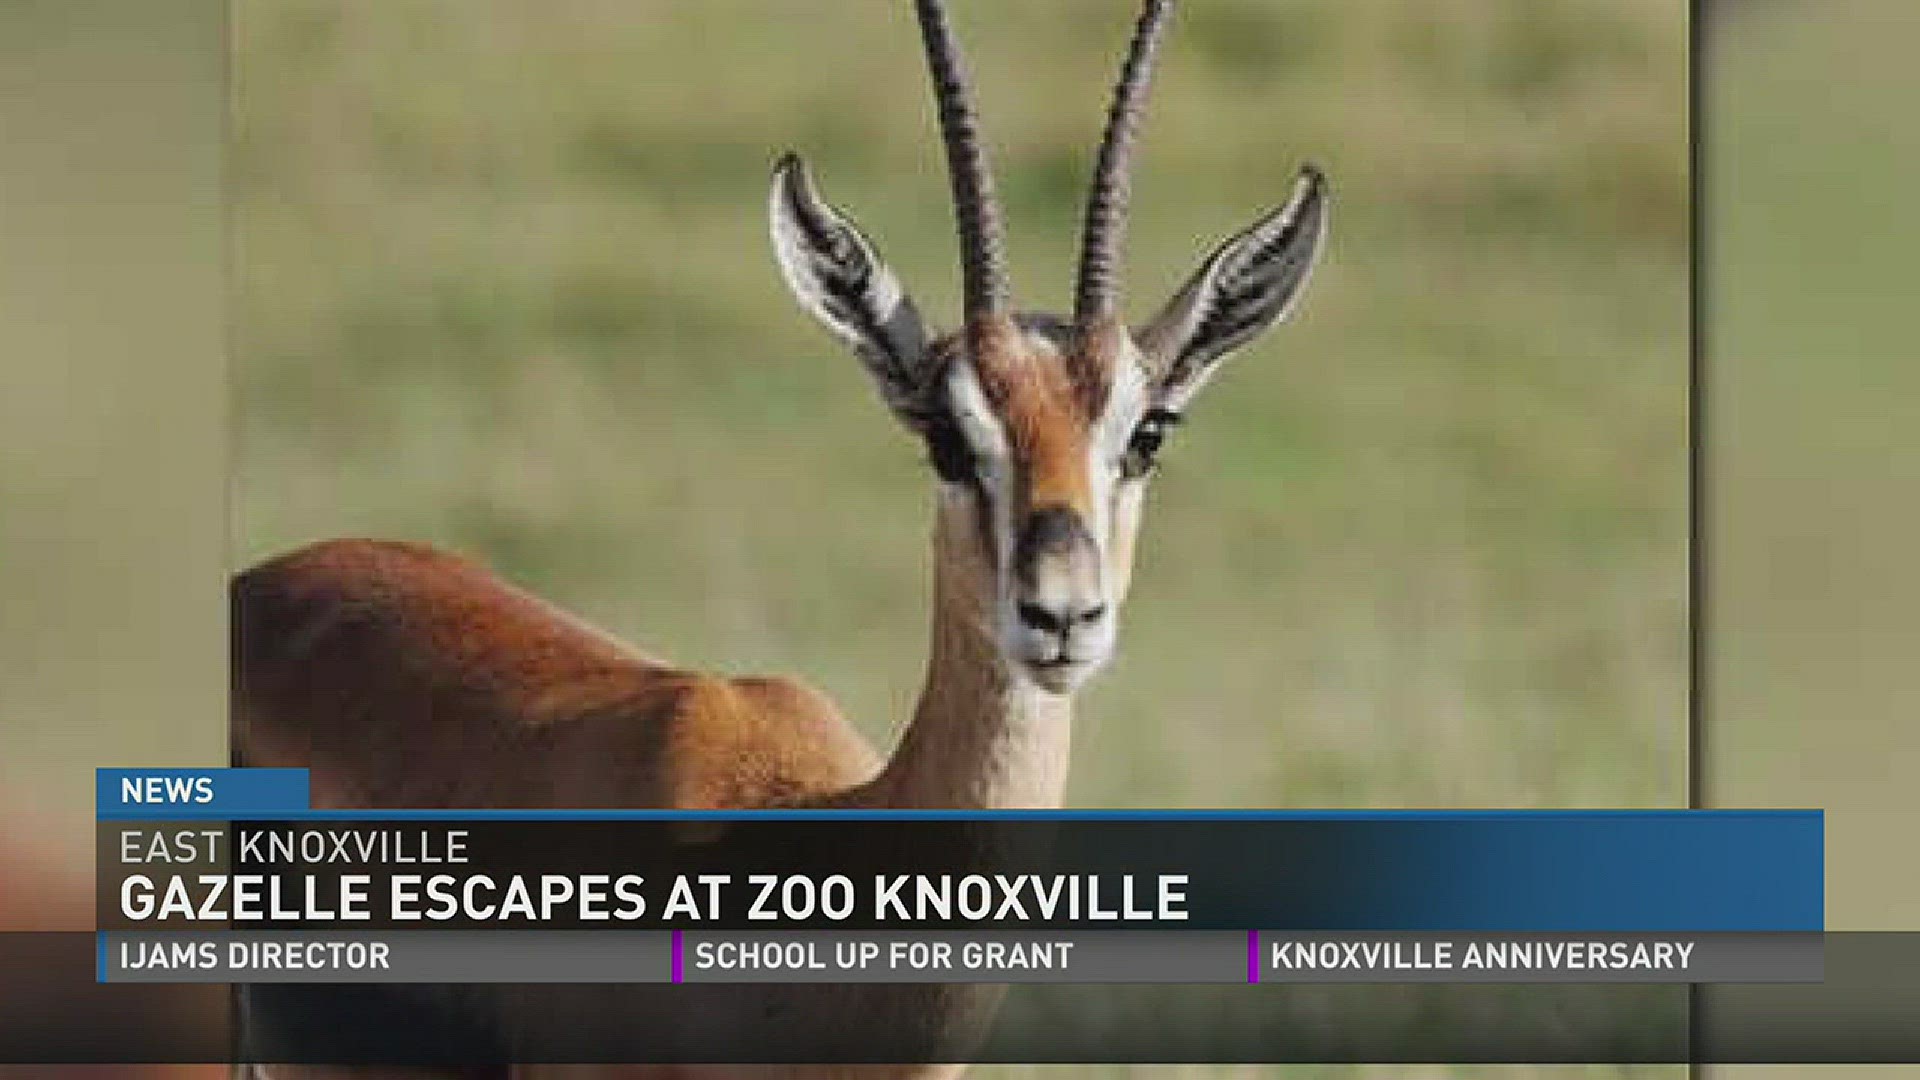 The 11-year-old Thompson's gazelle escaped from the Grasslands Africa enclosure at Zoo Knoxville around 10:30 p.m. on Sunday, according to zoo officials.